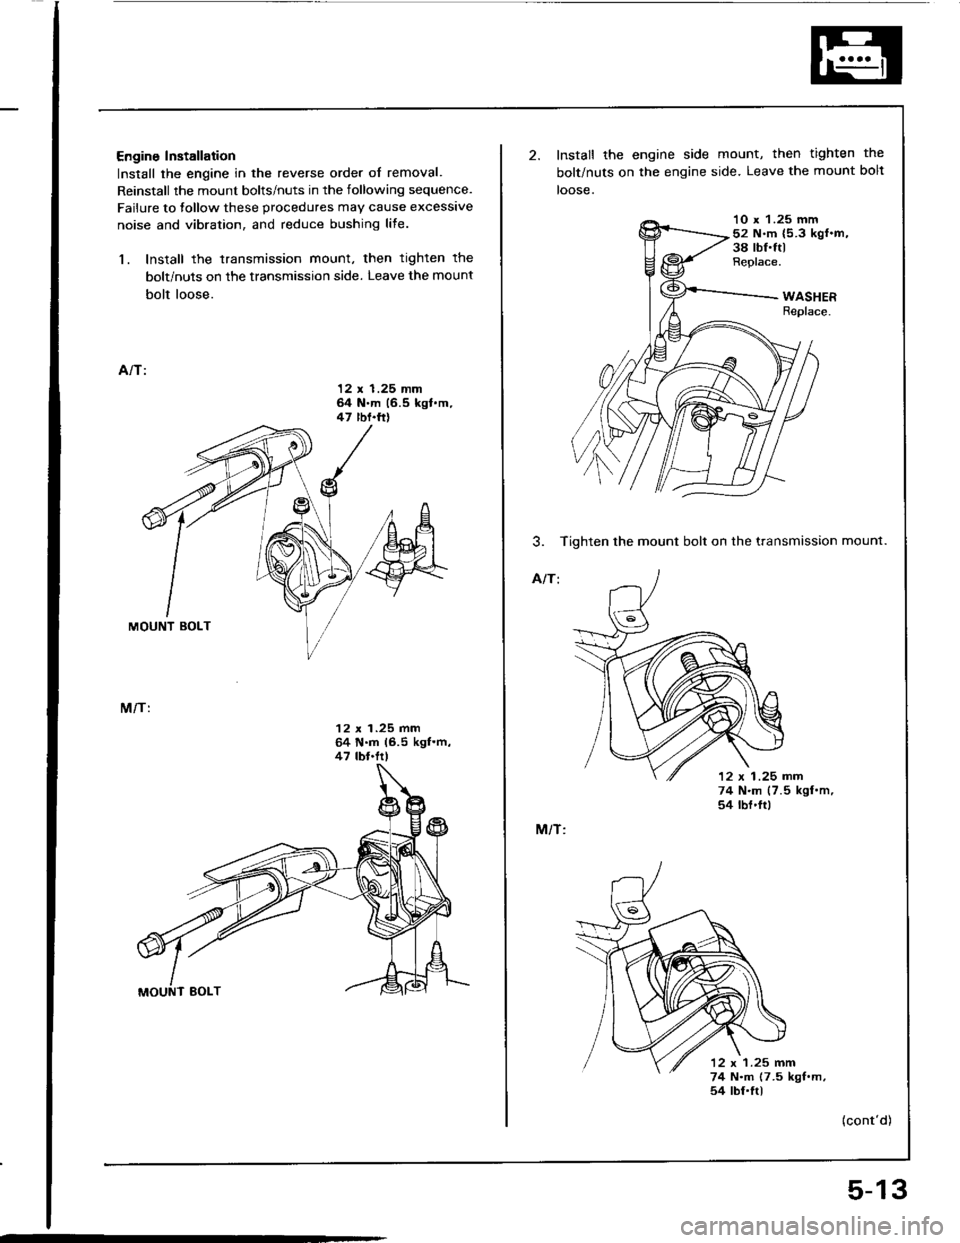 ACURA INTEGRA 1994  Service Repair Manual Engine Installation
Install the engine in the reverse order of removal.
Reinstall the mount bolts/nuts in the following sequence.
Failure to tollow these procedures may cause excessive
noise and vibra